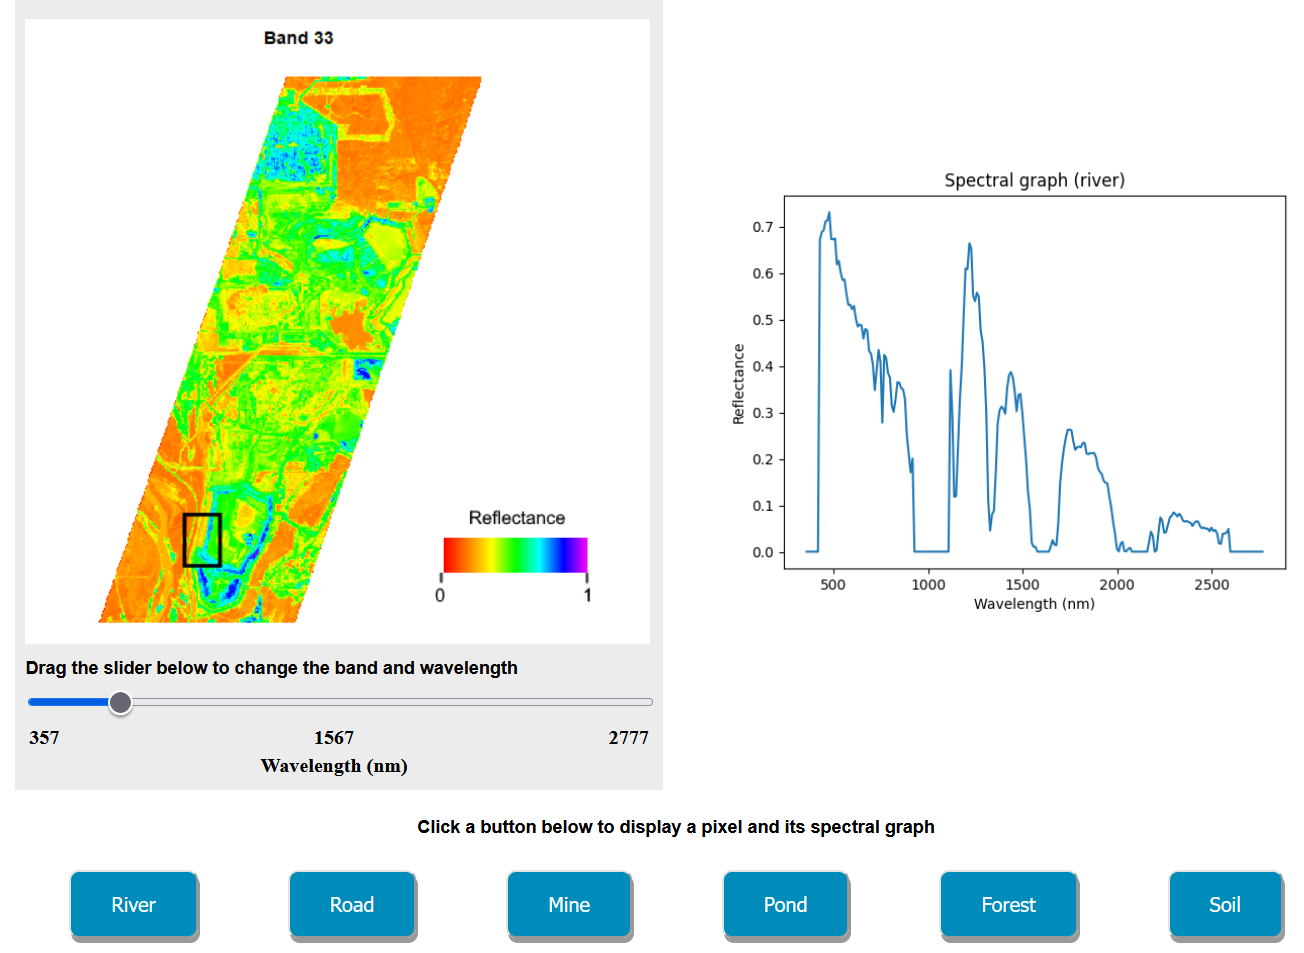 Online tool for visualizing the spectral signatures for different land covers using hyperspectral Hyperion satellite imagery. Data from United States Geological Survey - Licensed by U.S. Public Domain. <a href='https://ubcemergingmedialab.github.io/geomatics-textbook/viz/emspectrum-viz/'>Click here to access the interactive tool.</a> Kenny Zhou, CC-BY-SA-4.0.